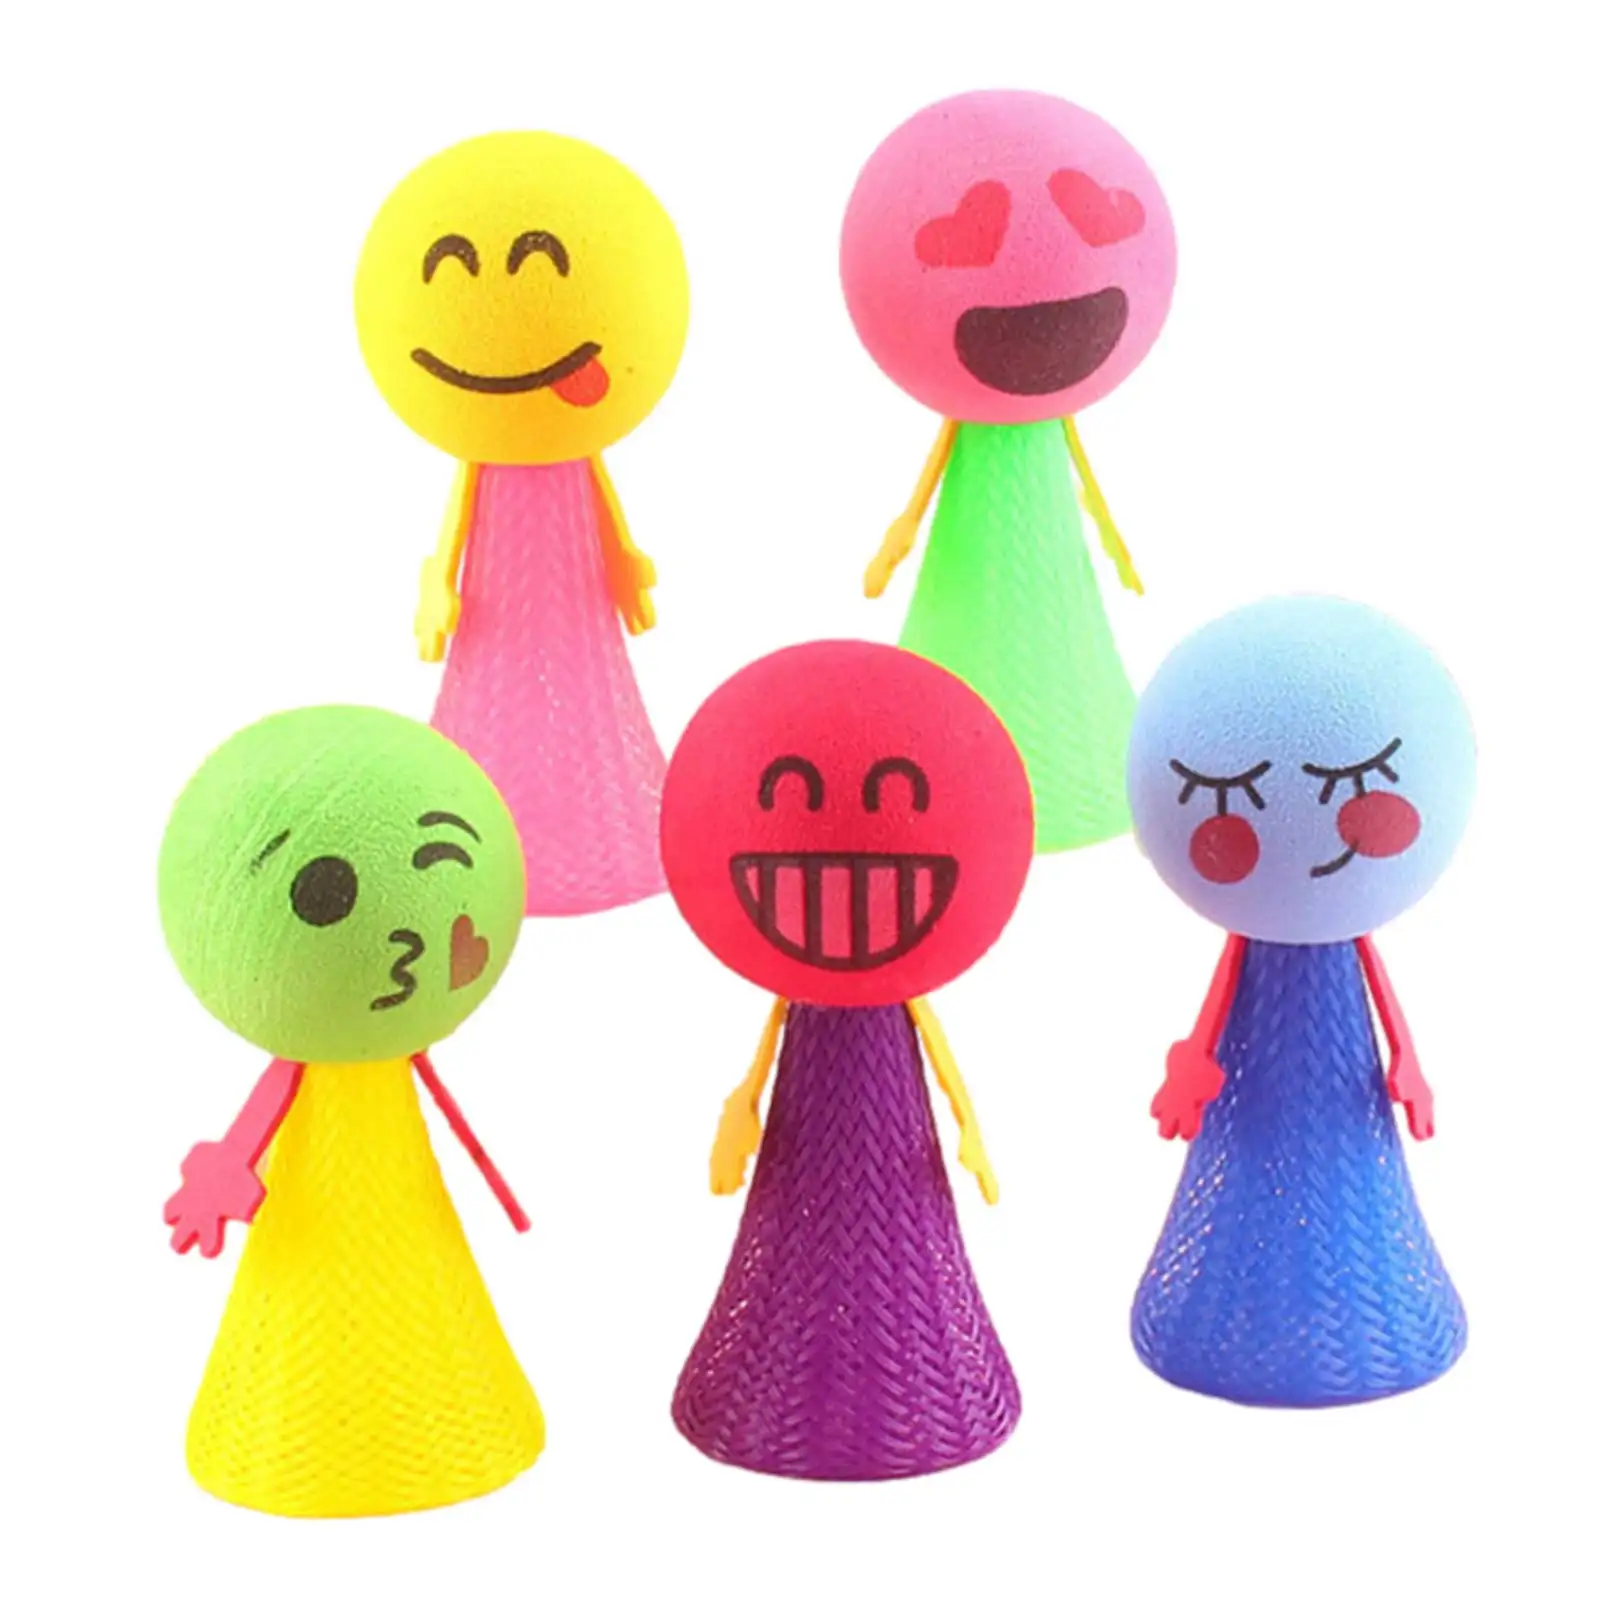 

1 PCS Jumping Doll Kids Party Toys Party Favors Goodie Bag Piniata Fillers Novelty Toy Gift Toys Boy Girl Fun Games Supplies